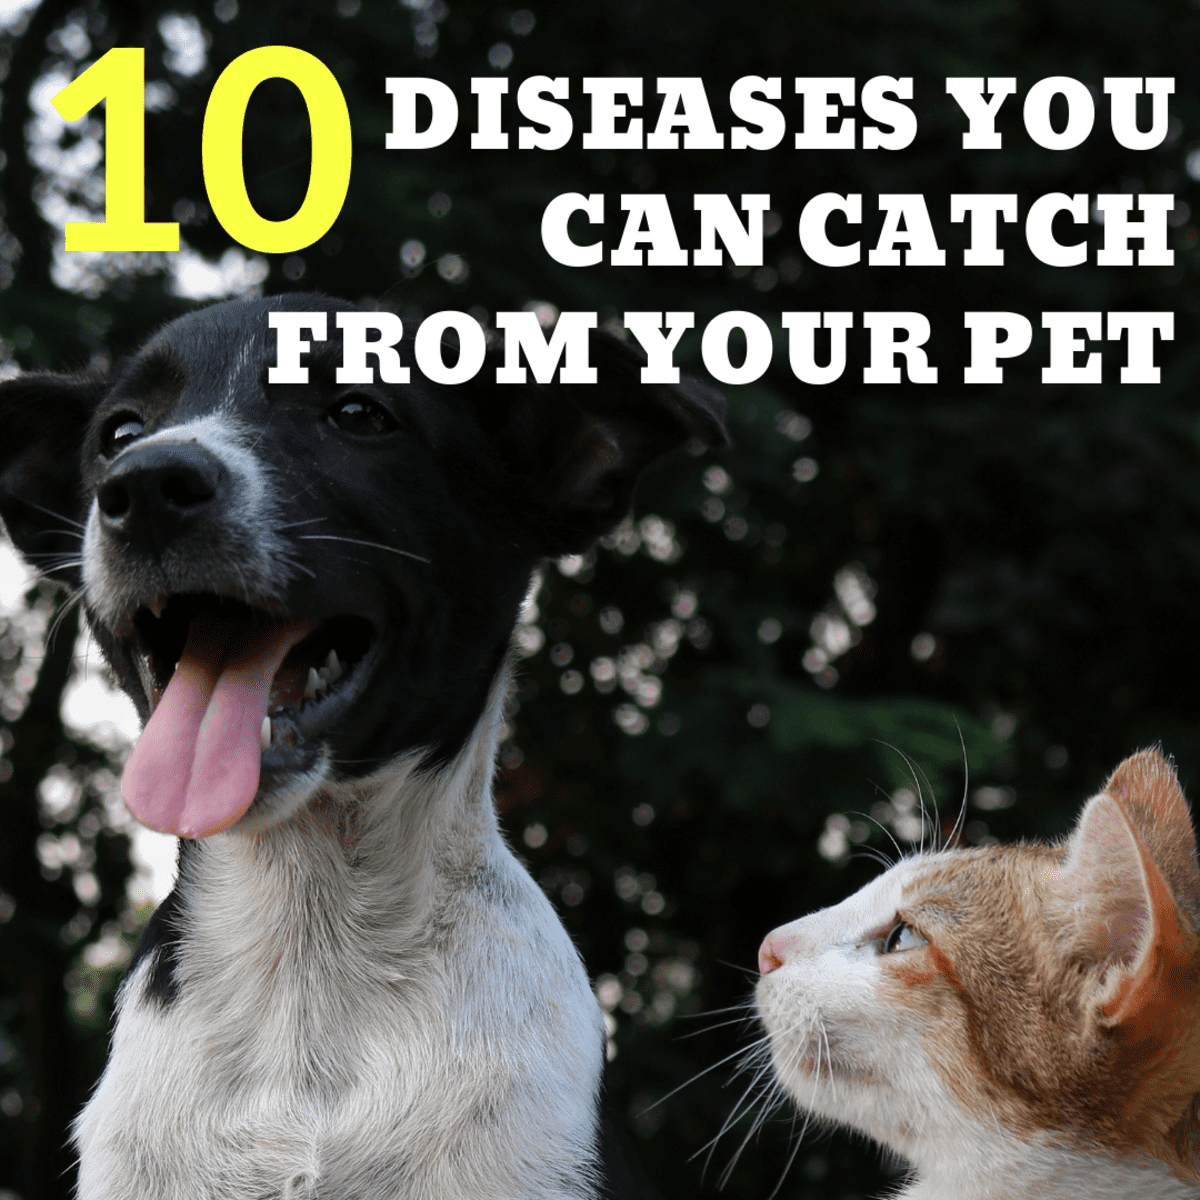 can dogs give cats diseases